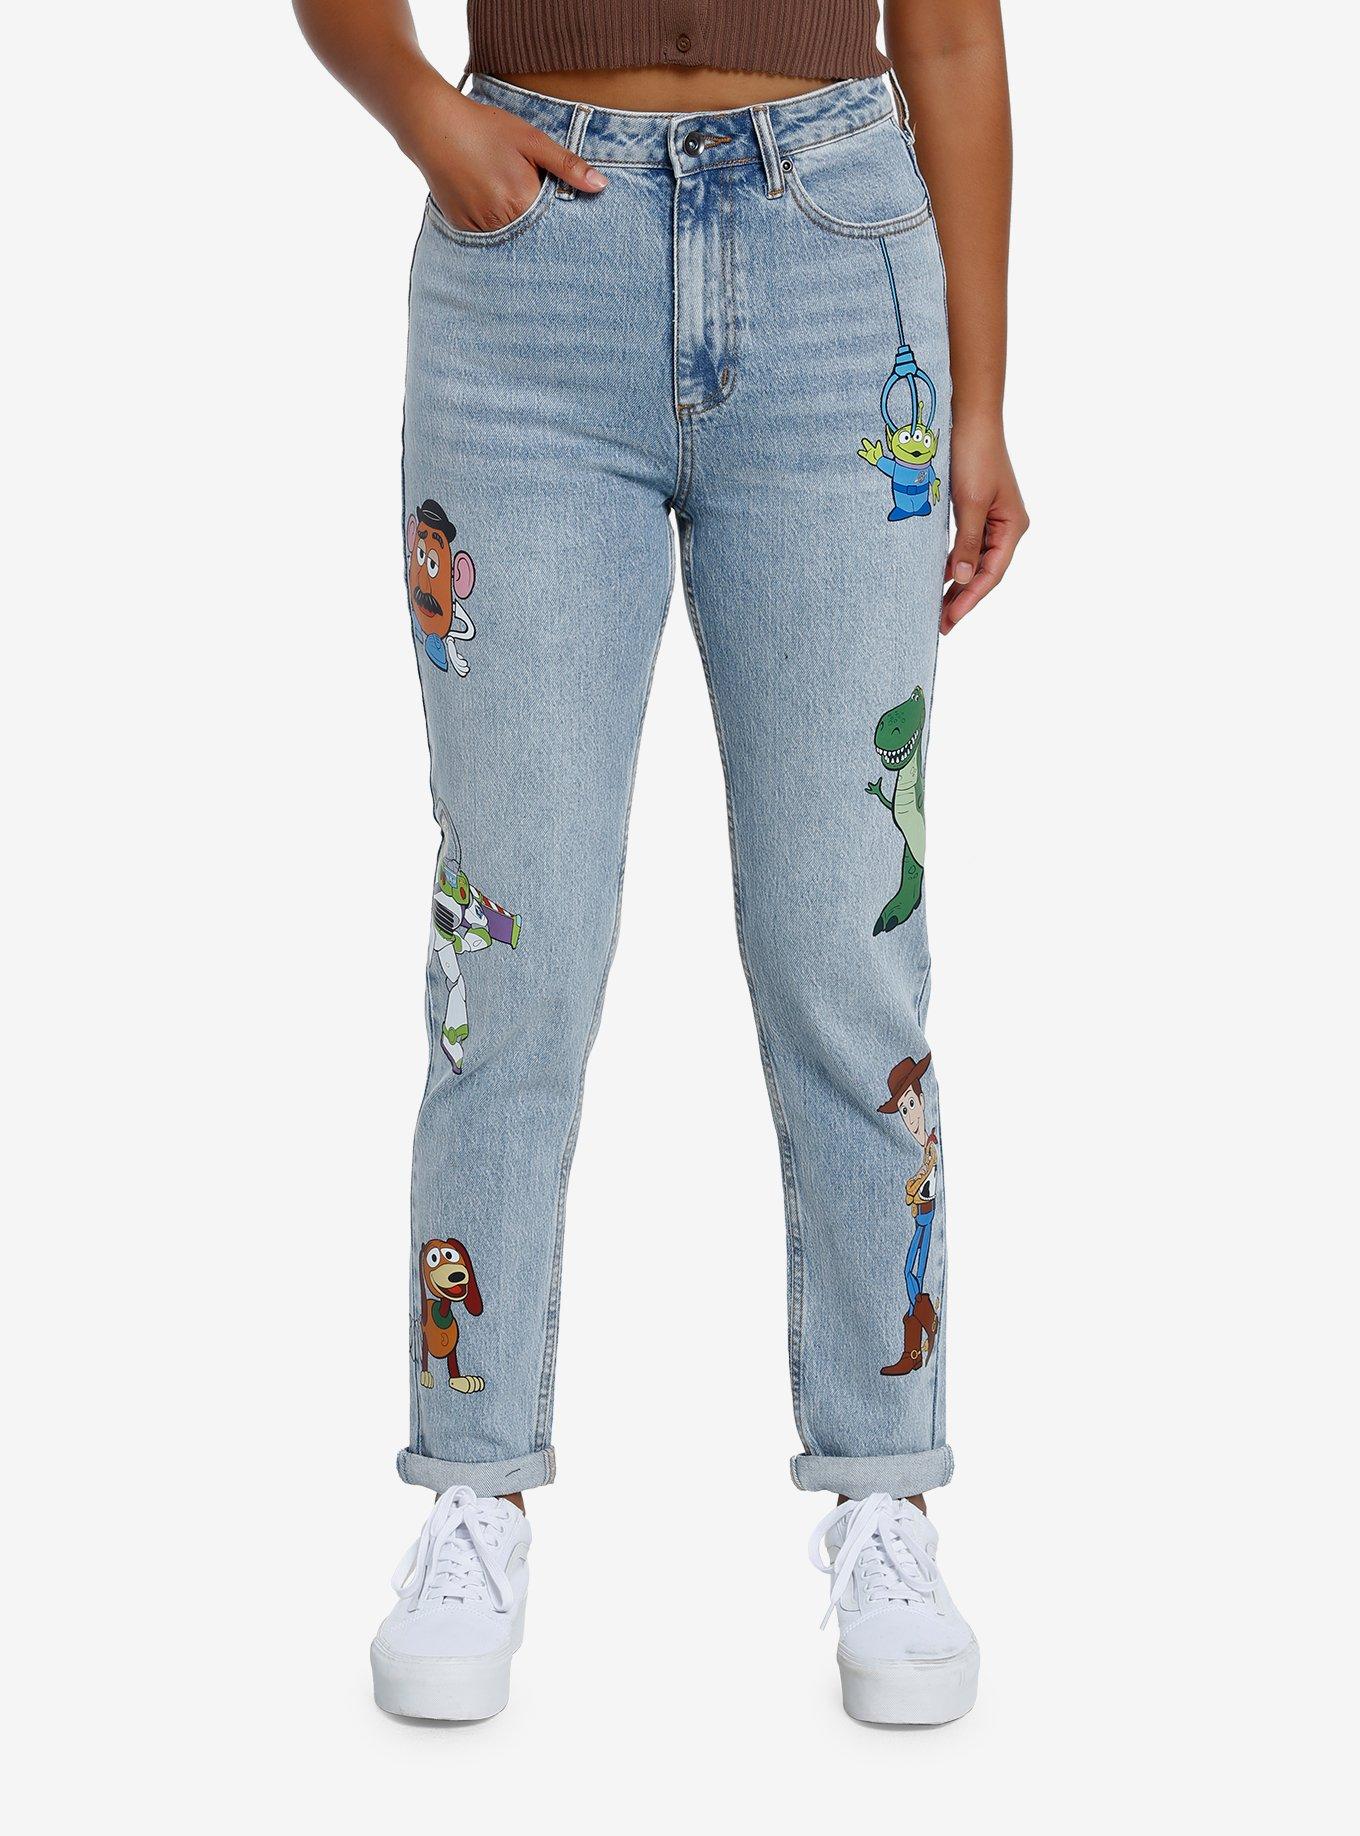 Disney Pixar Toy Story Character Mom Jeans | Her Universe